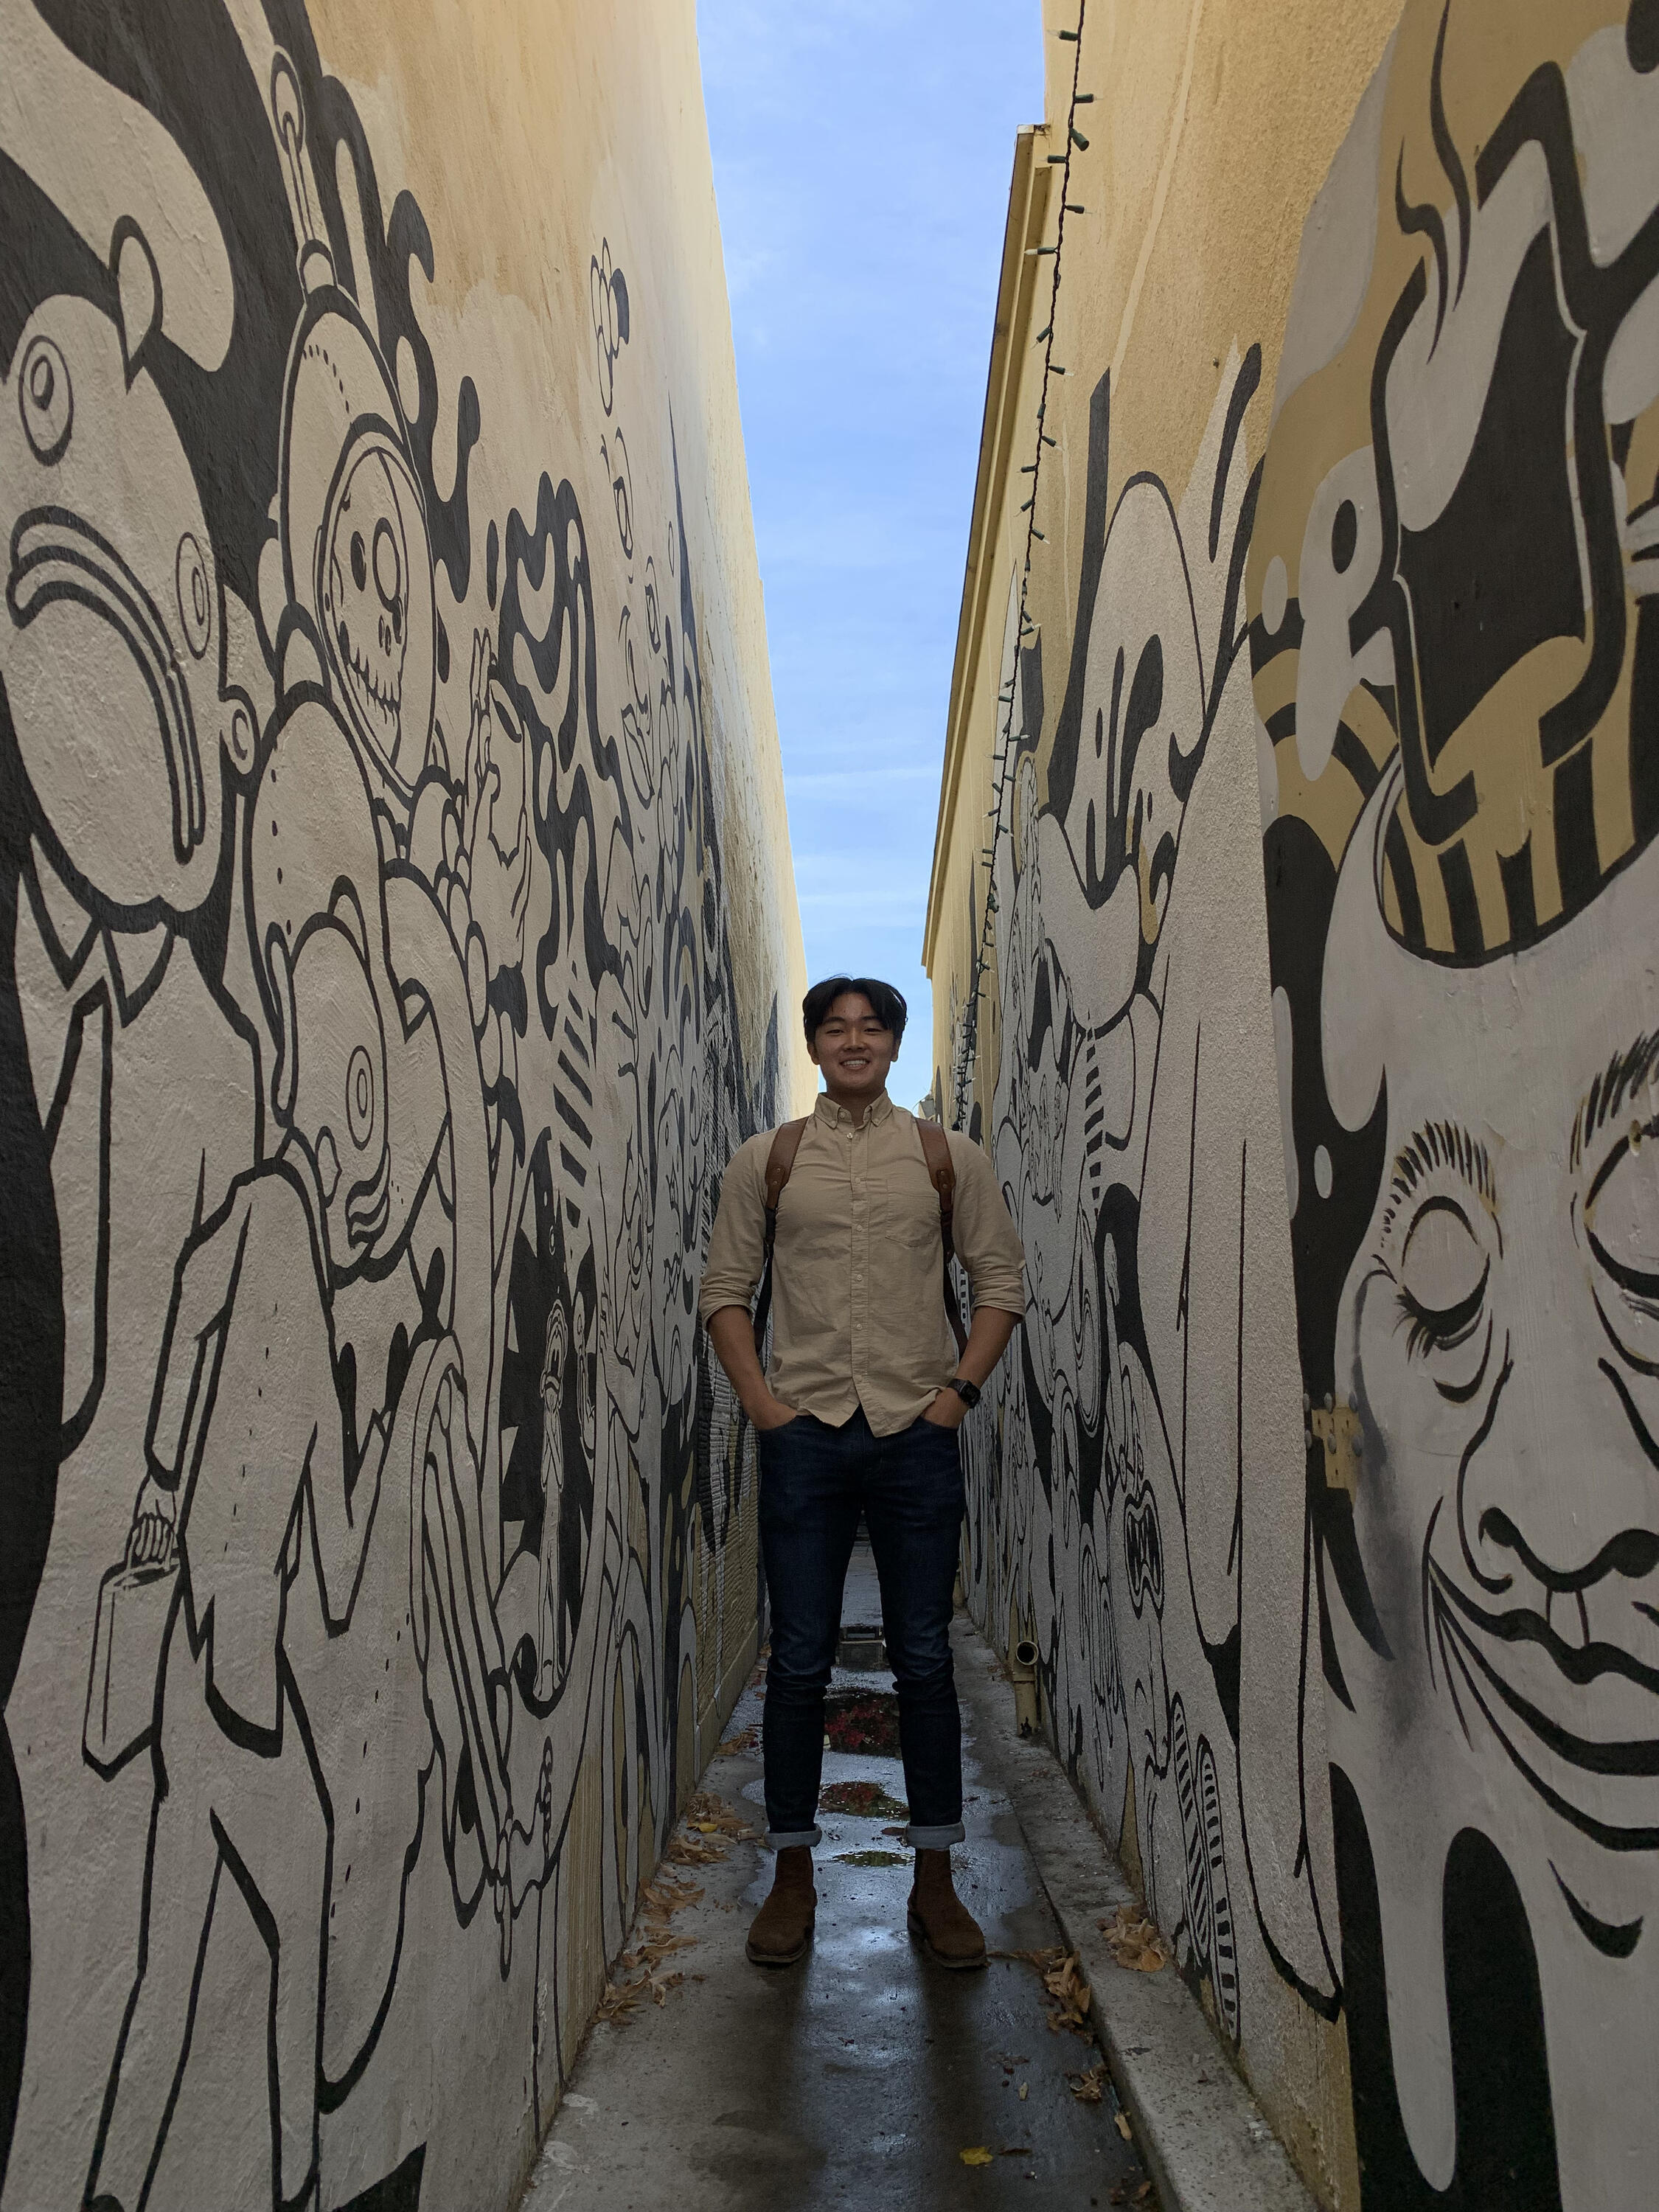 Photo of Jonny smiling and standing in a narrow alley.